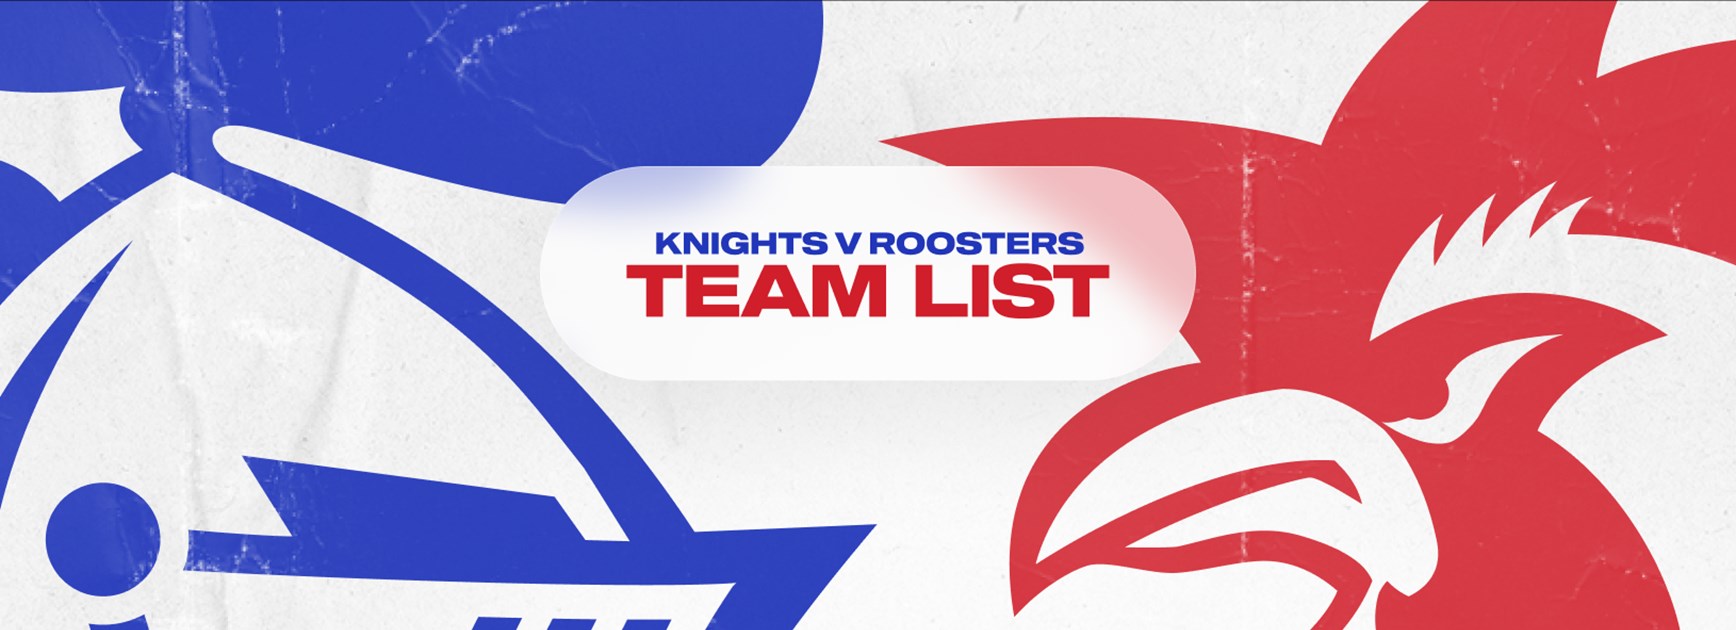 Knights v Roosters Round 6 NRL team list